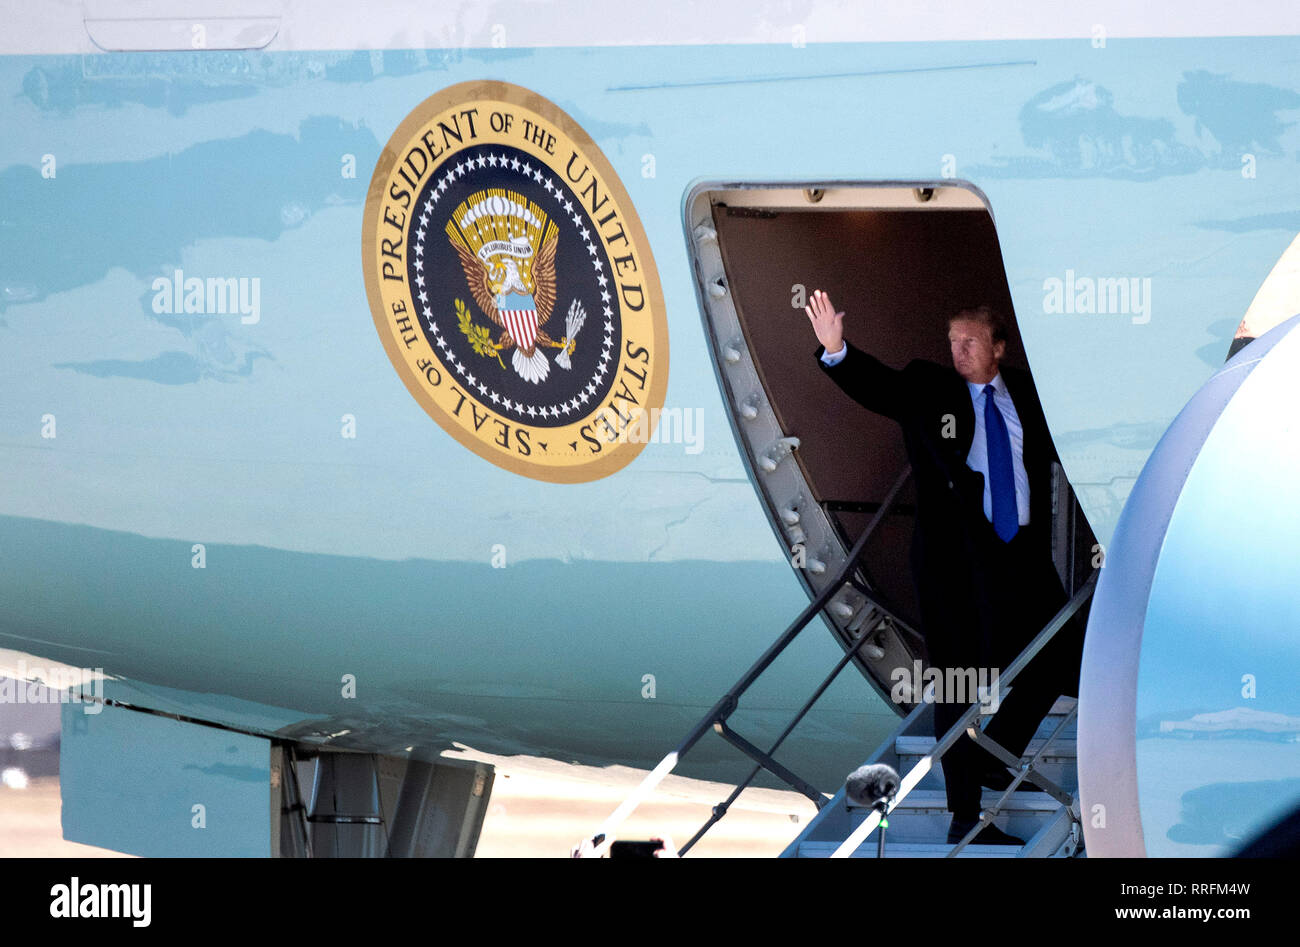 United States President Donald J. Trump waves as he boards Air Force One as he departs for Vietnam for a summit with North Korean leader Kim Jong Un, at Joint Base Andrews, February 25, 2019. This will be the second summit between North Korea and the United States on denuclearization of the Korean Peninsula. Credit: Kevin Dietsch/Pool via CNP | usage worldwide Stock Photo